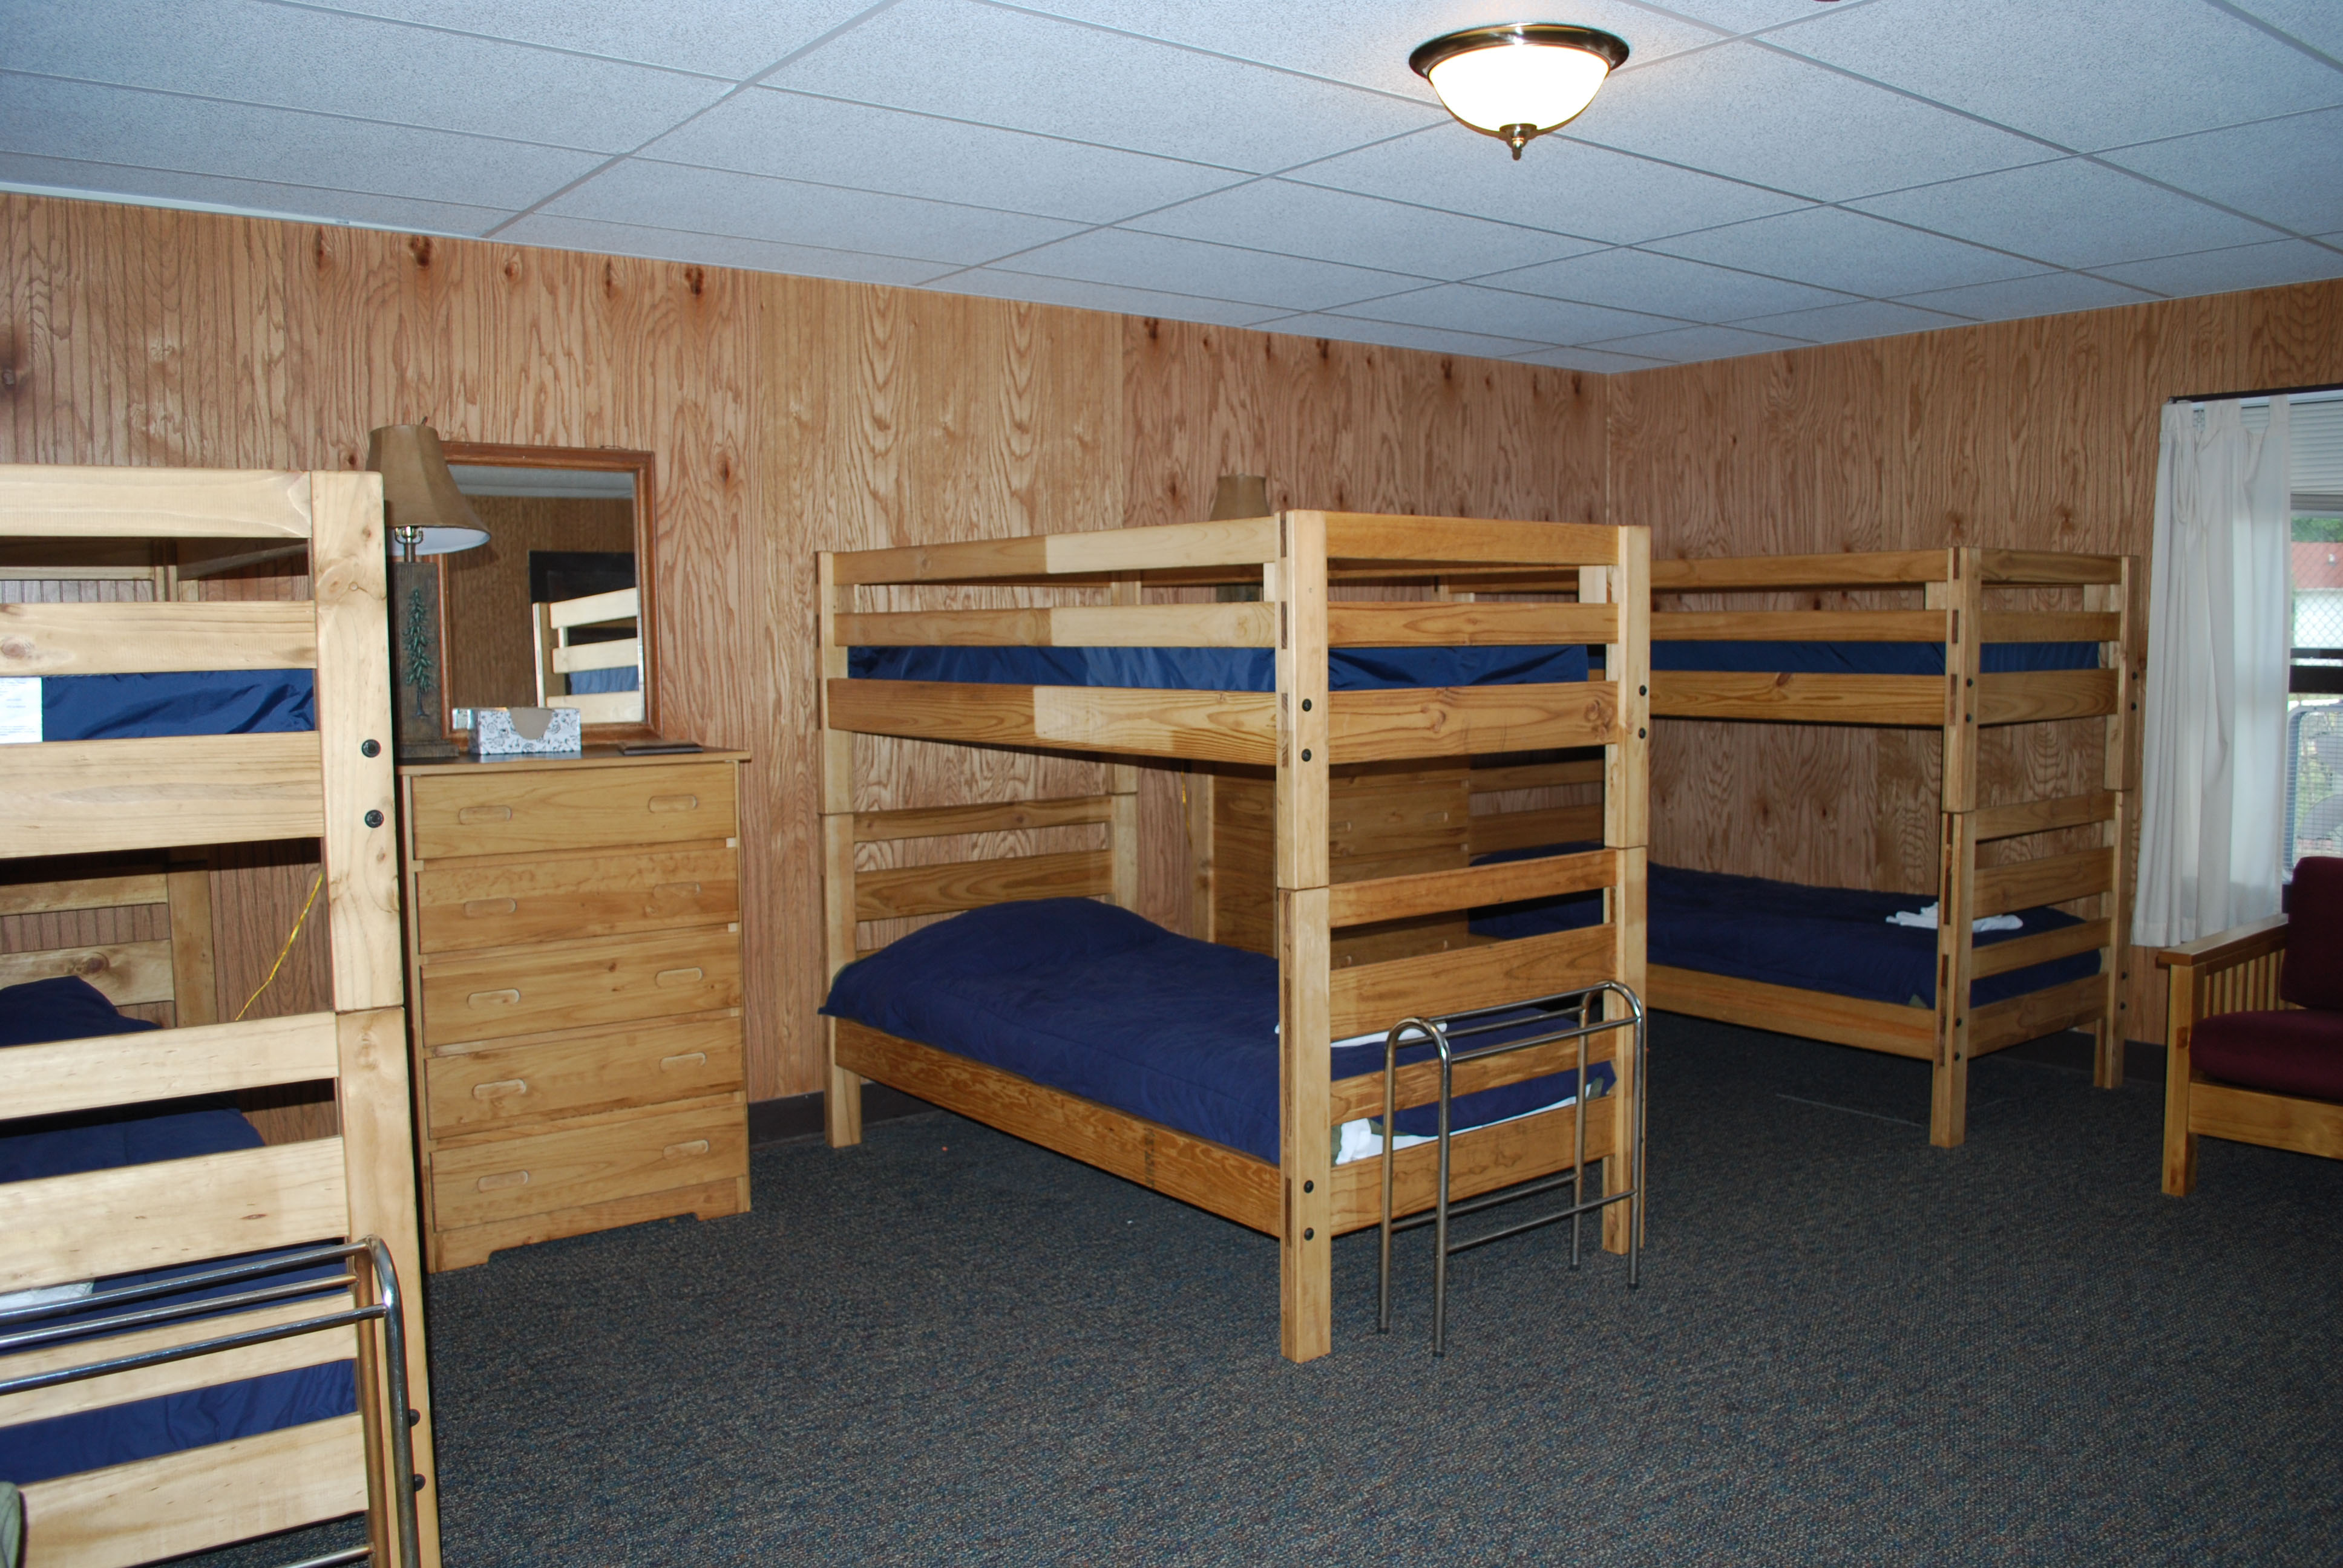 Hickory interior with bunkbeds